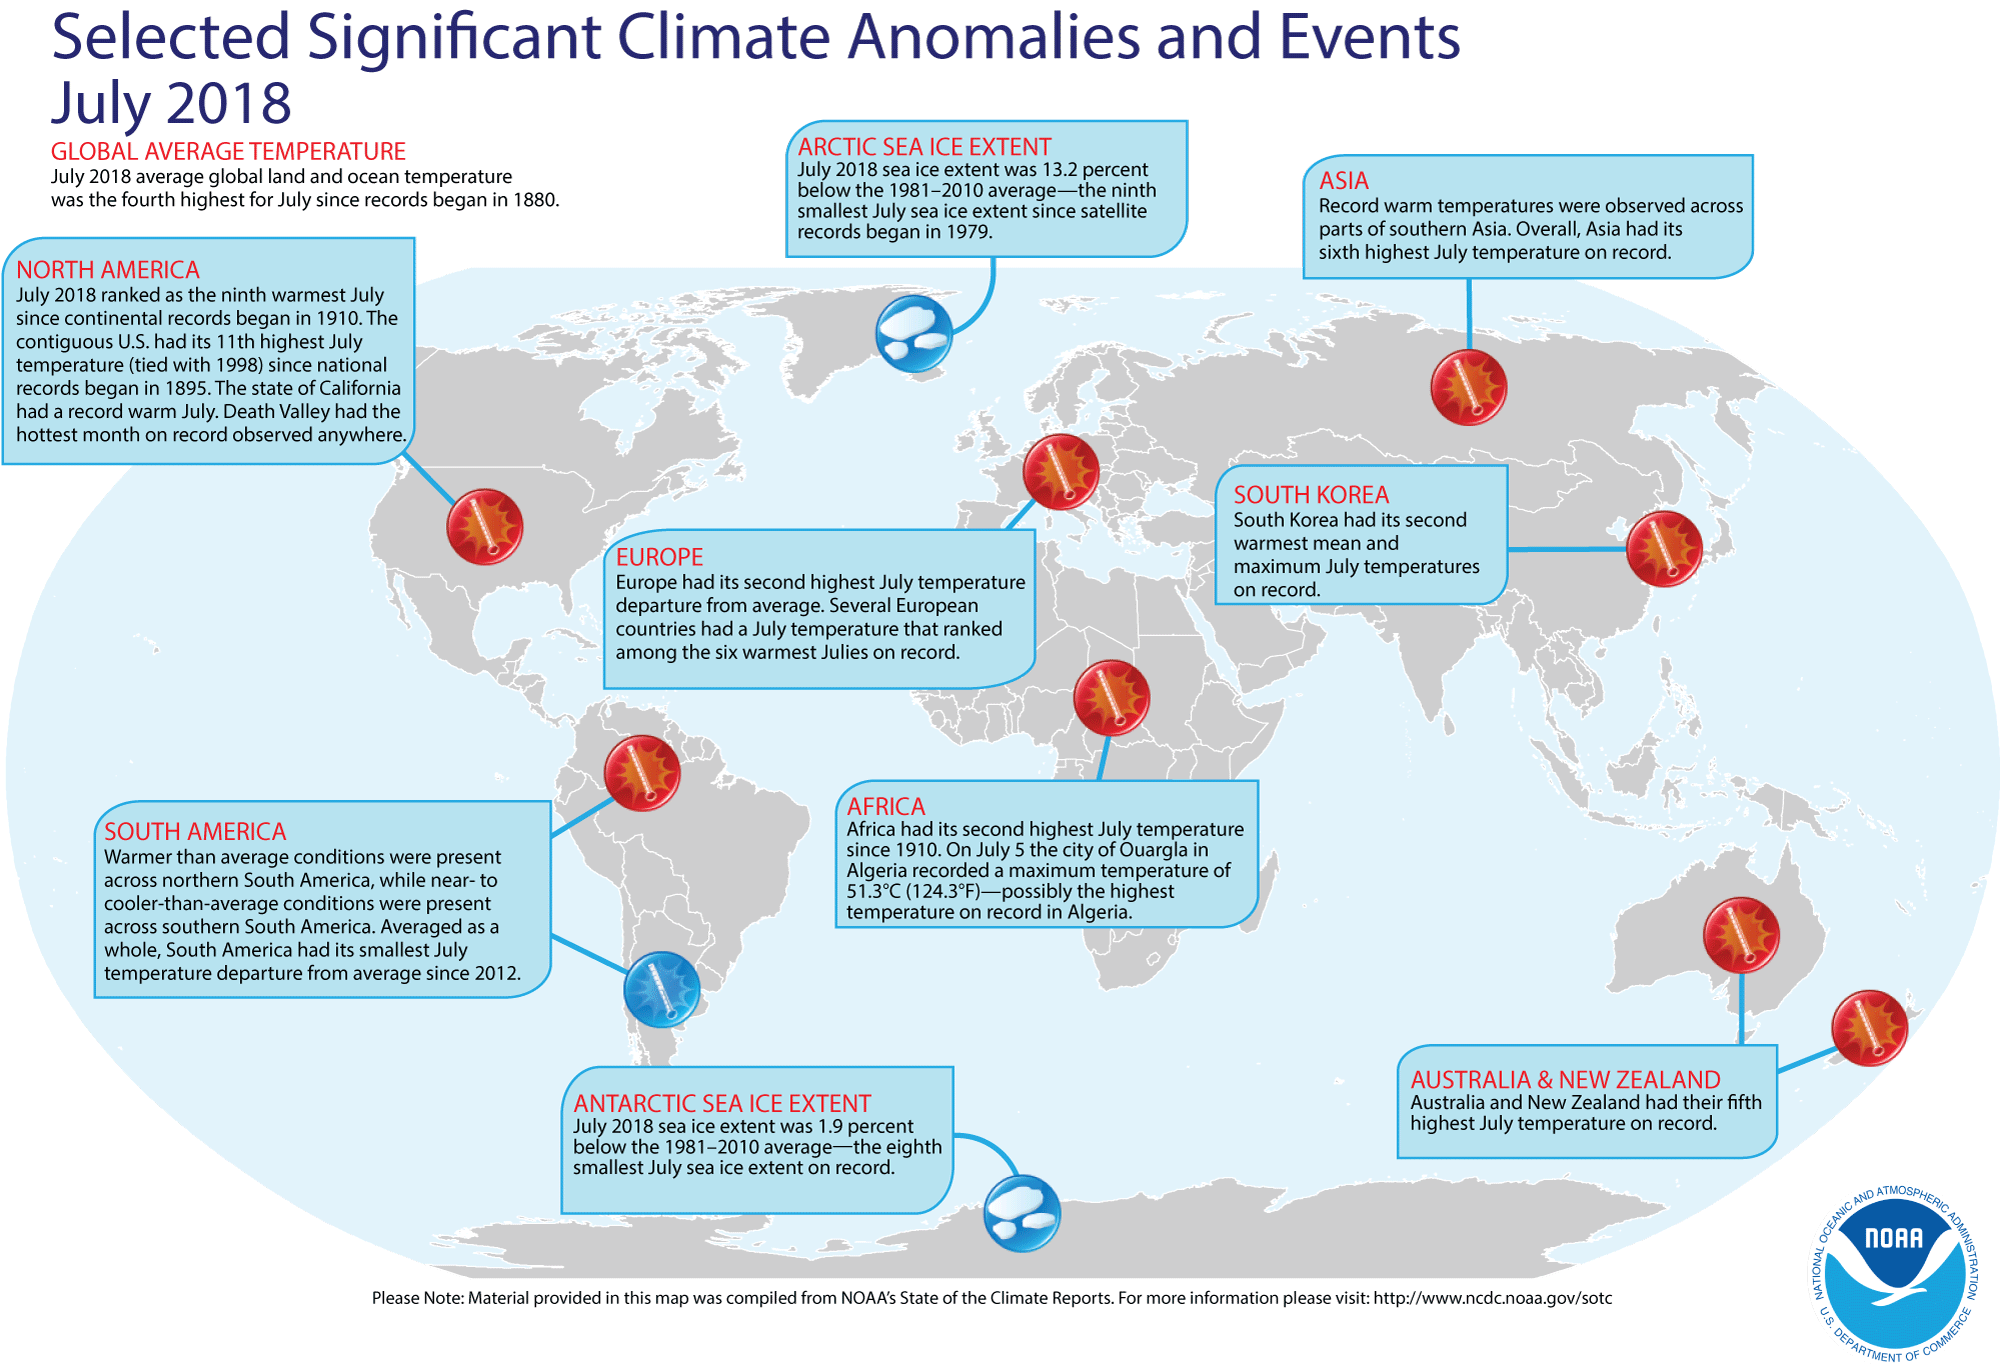 An annotated map of the world showing notable climate events that occurred in July 2018. For details, see the bulleted list below in our story and on the Web at http://www.ncdc.noaa.gov/sotc/global/2018/07.